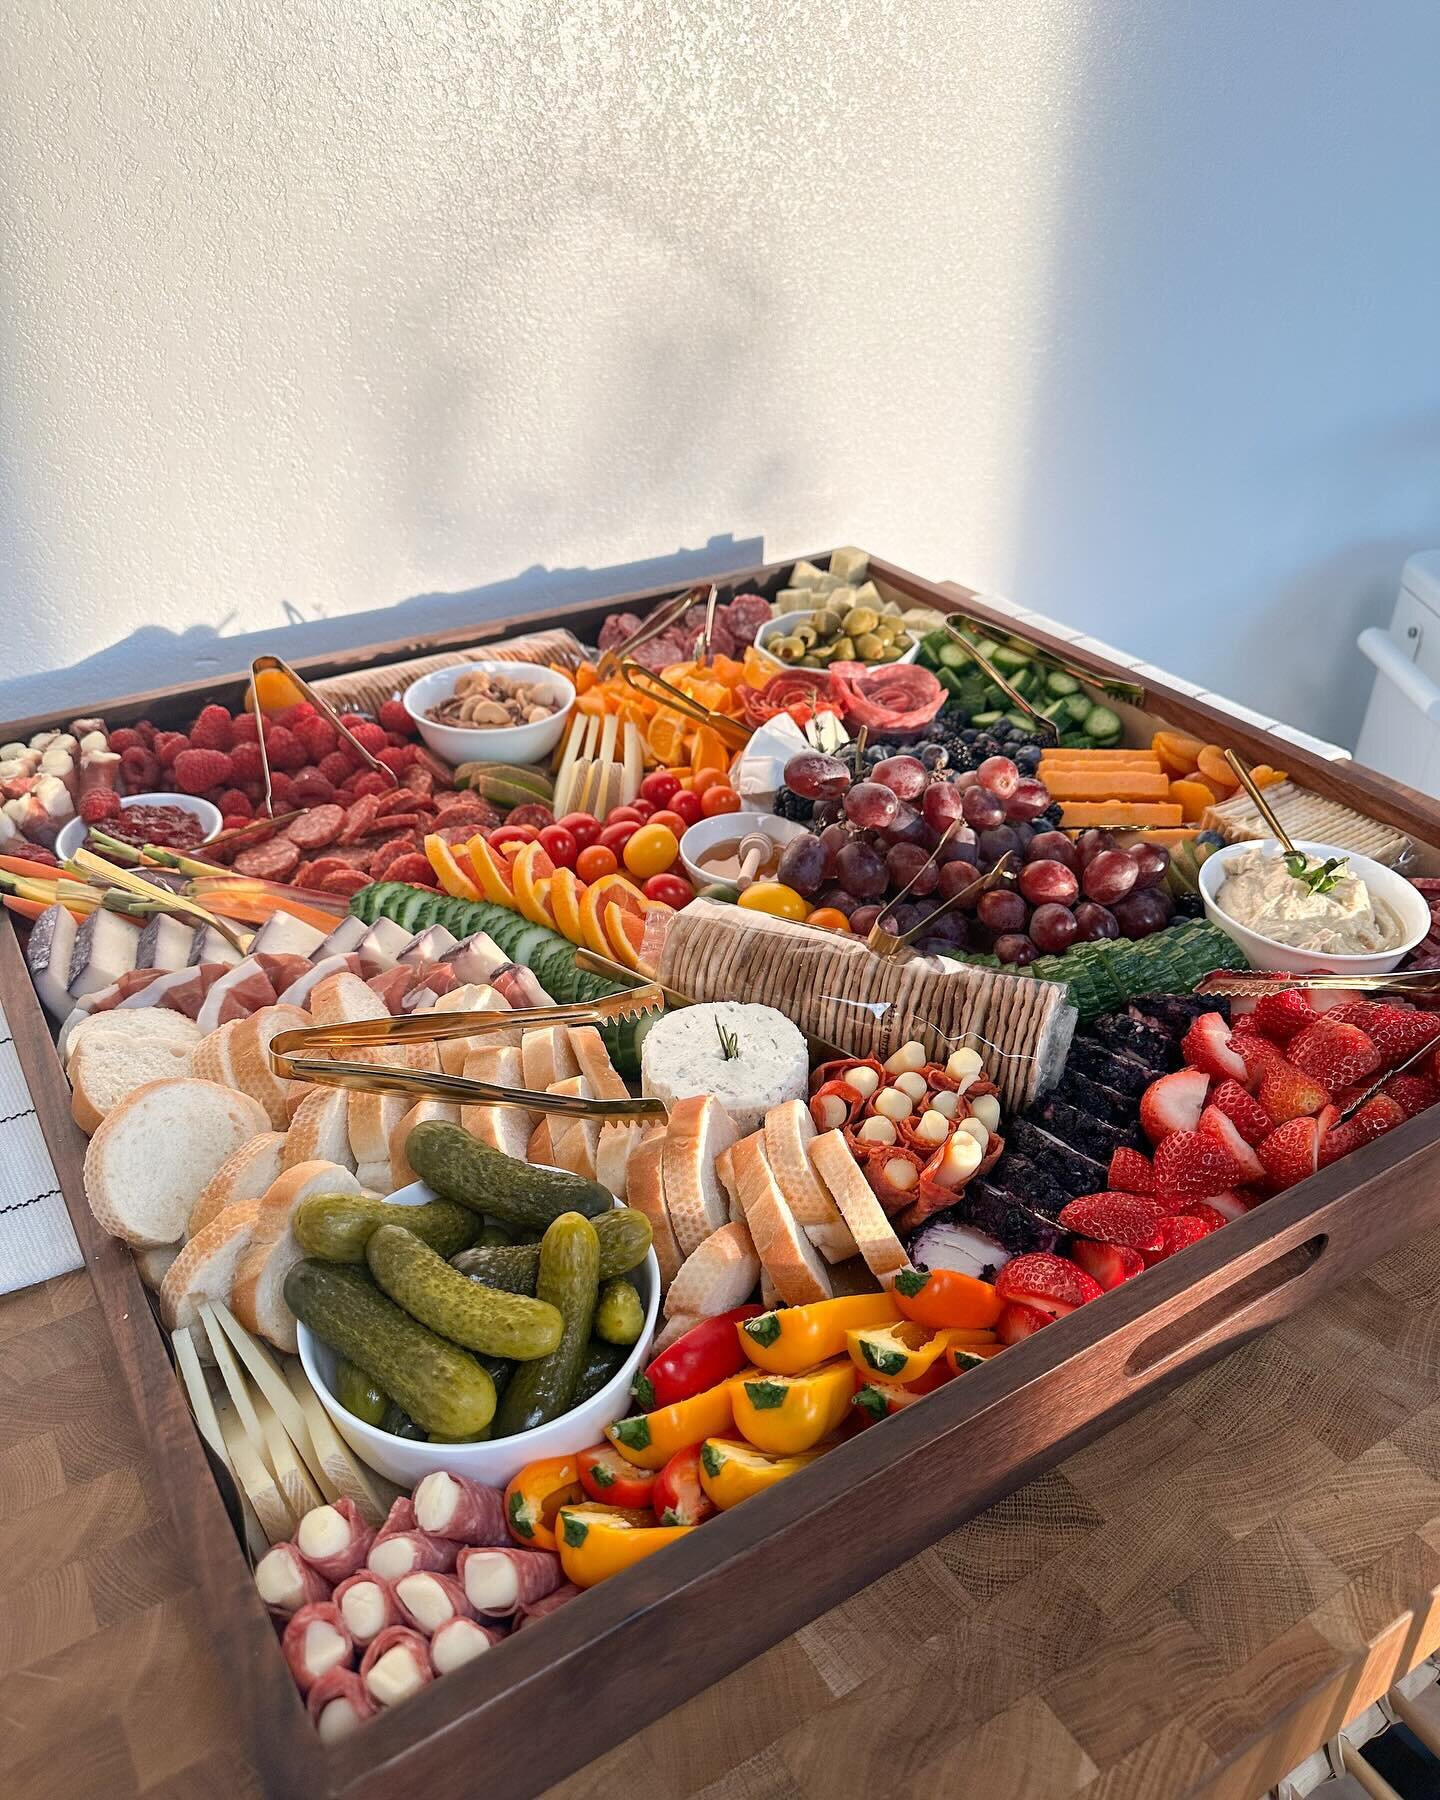 This is your sign to order a charcuterie board for your next gathering. Link in bio. ✨

#Charcuterie #GrazingTable #CharcuterieBoard #TulsaCharcuterie #Bello #TulsaFoodie #TulsaCatering #TulsaWedding #WomenOwnedBusiness #OklahomaBride